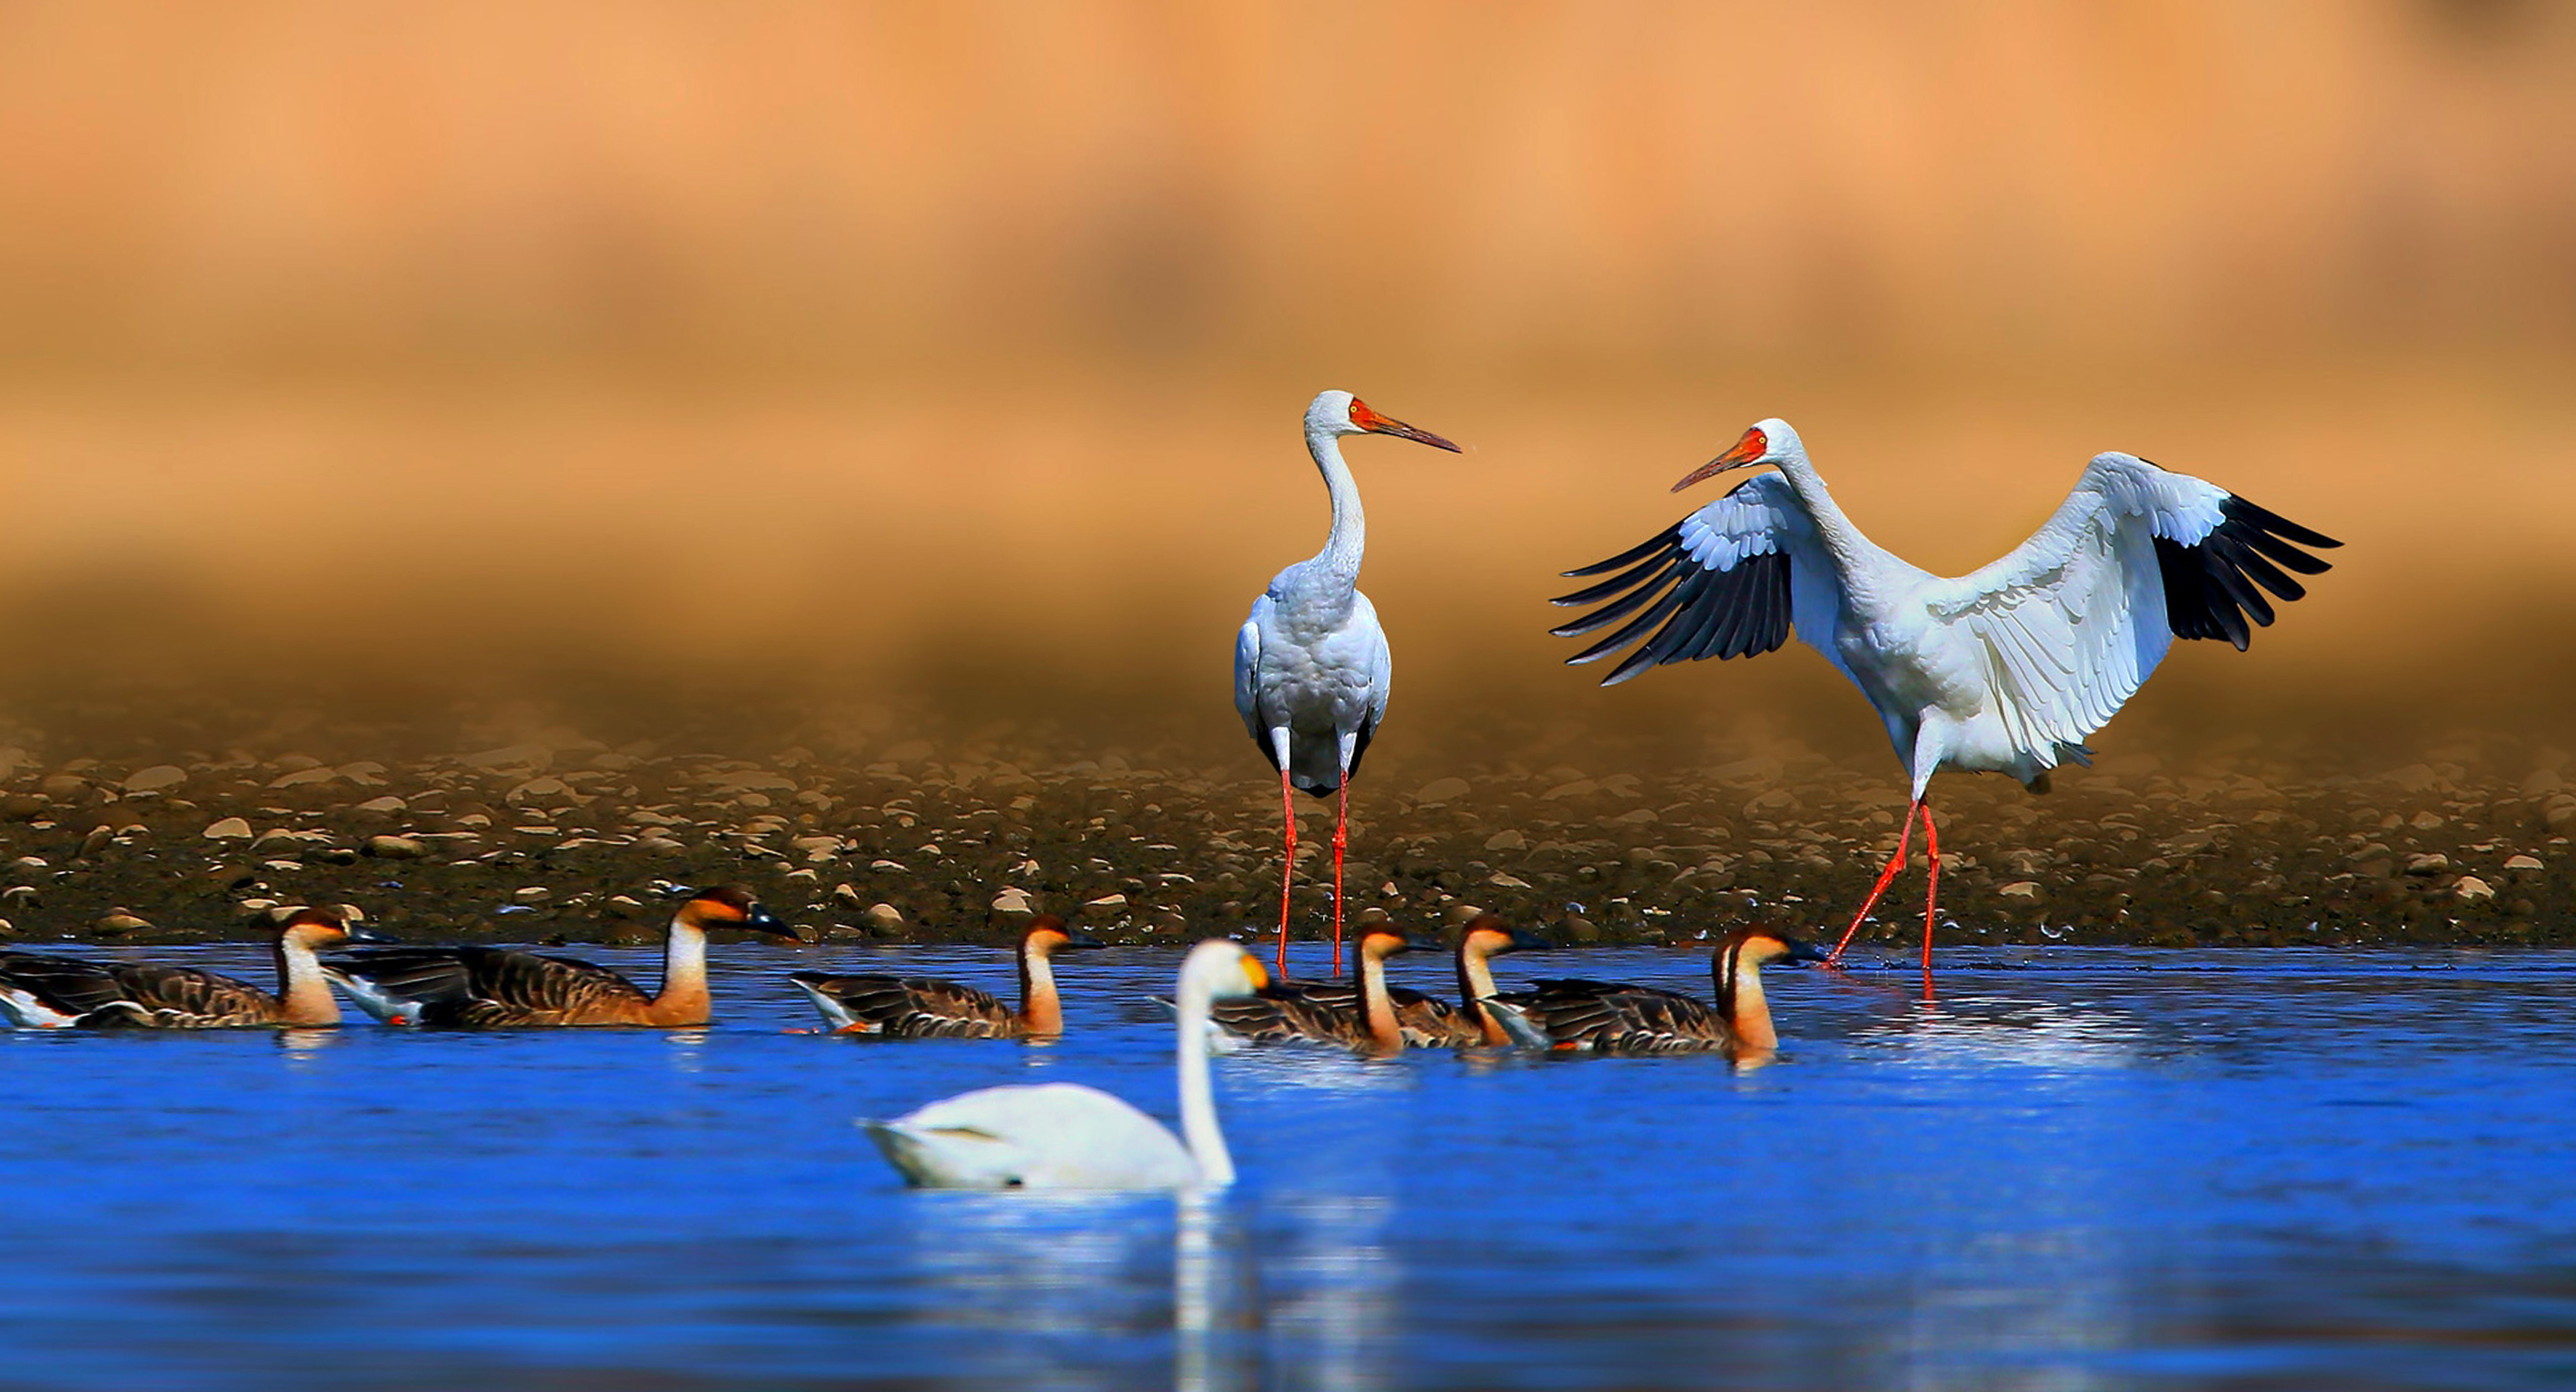 The majestic Siberian cranes fly south every winter. Source: Shutterstock